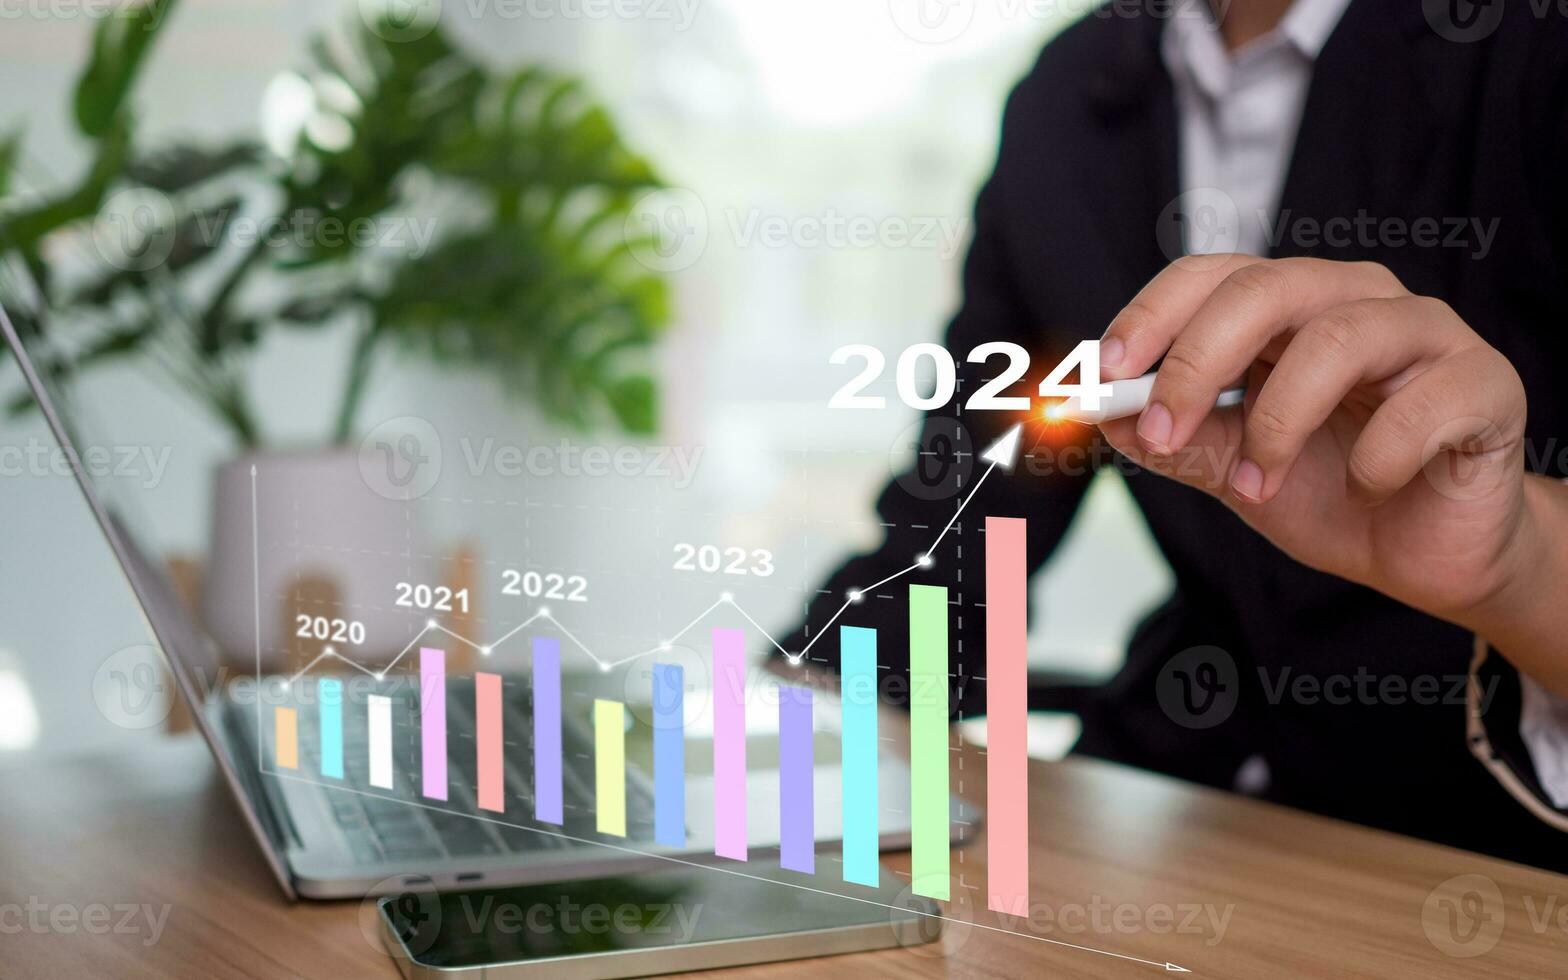 Stock trading. Finance. Investing. Growing business. Businesswoman in suit pointing with a pen at the tip of an arrow and a graph bar Represents business growth in 2024. concept of goals for 2024 photo